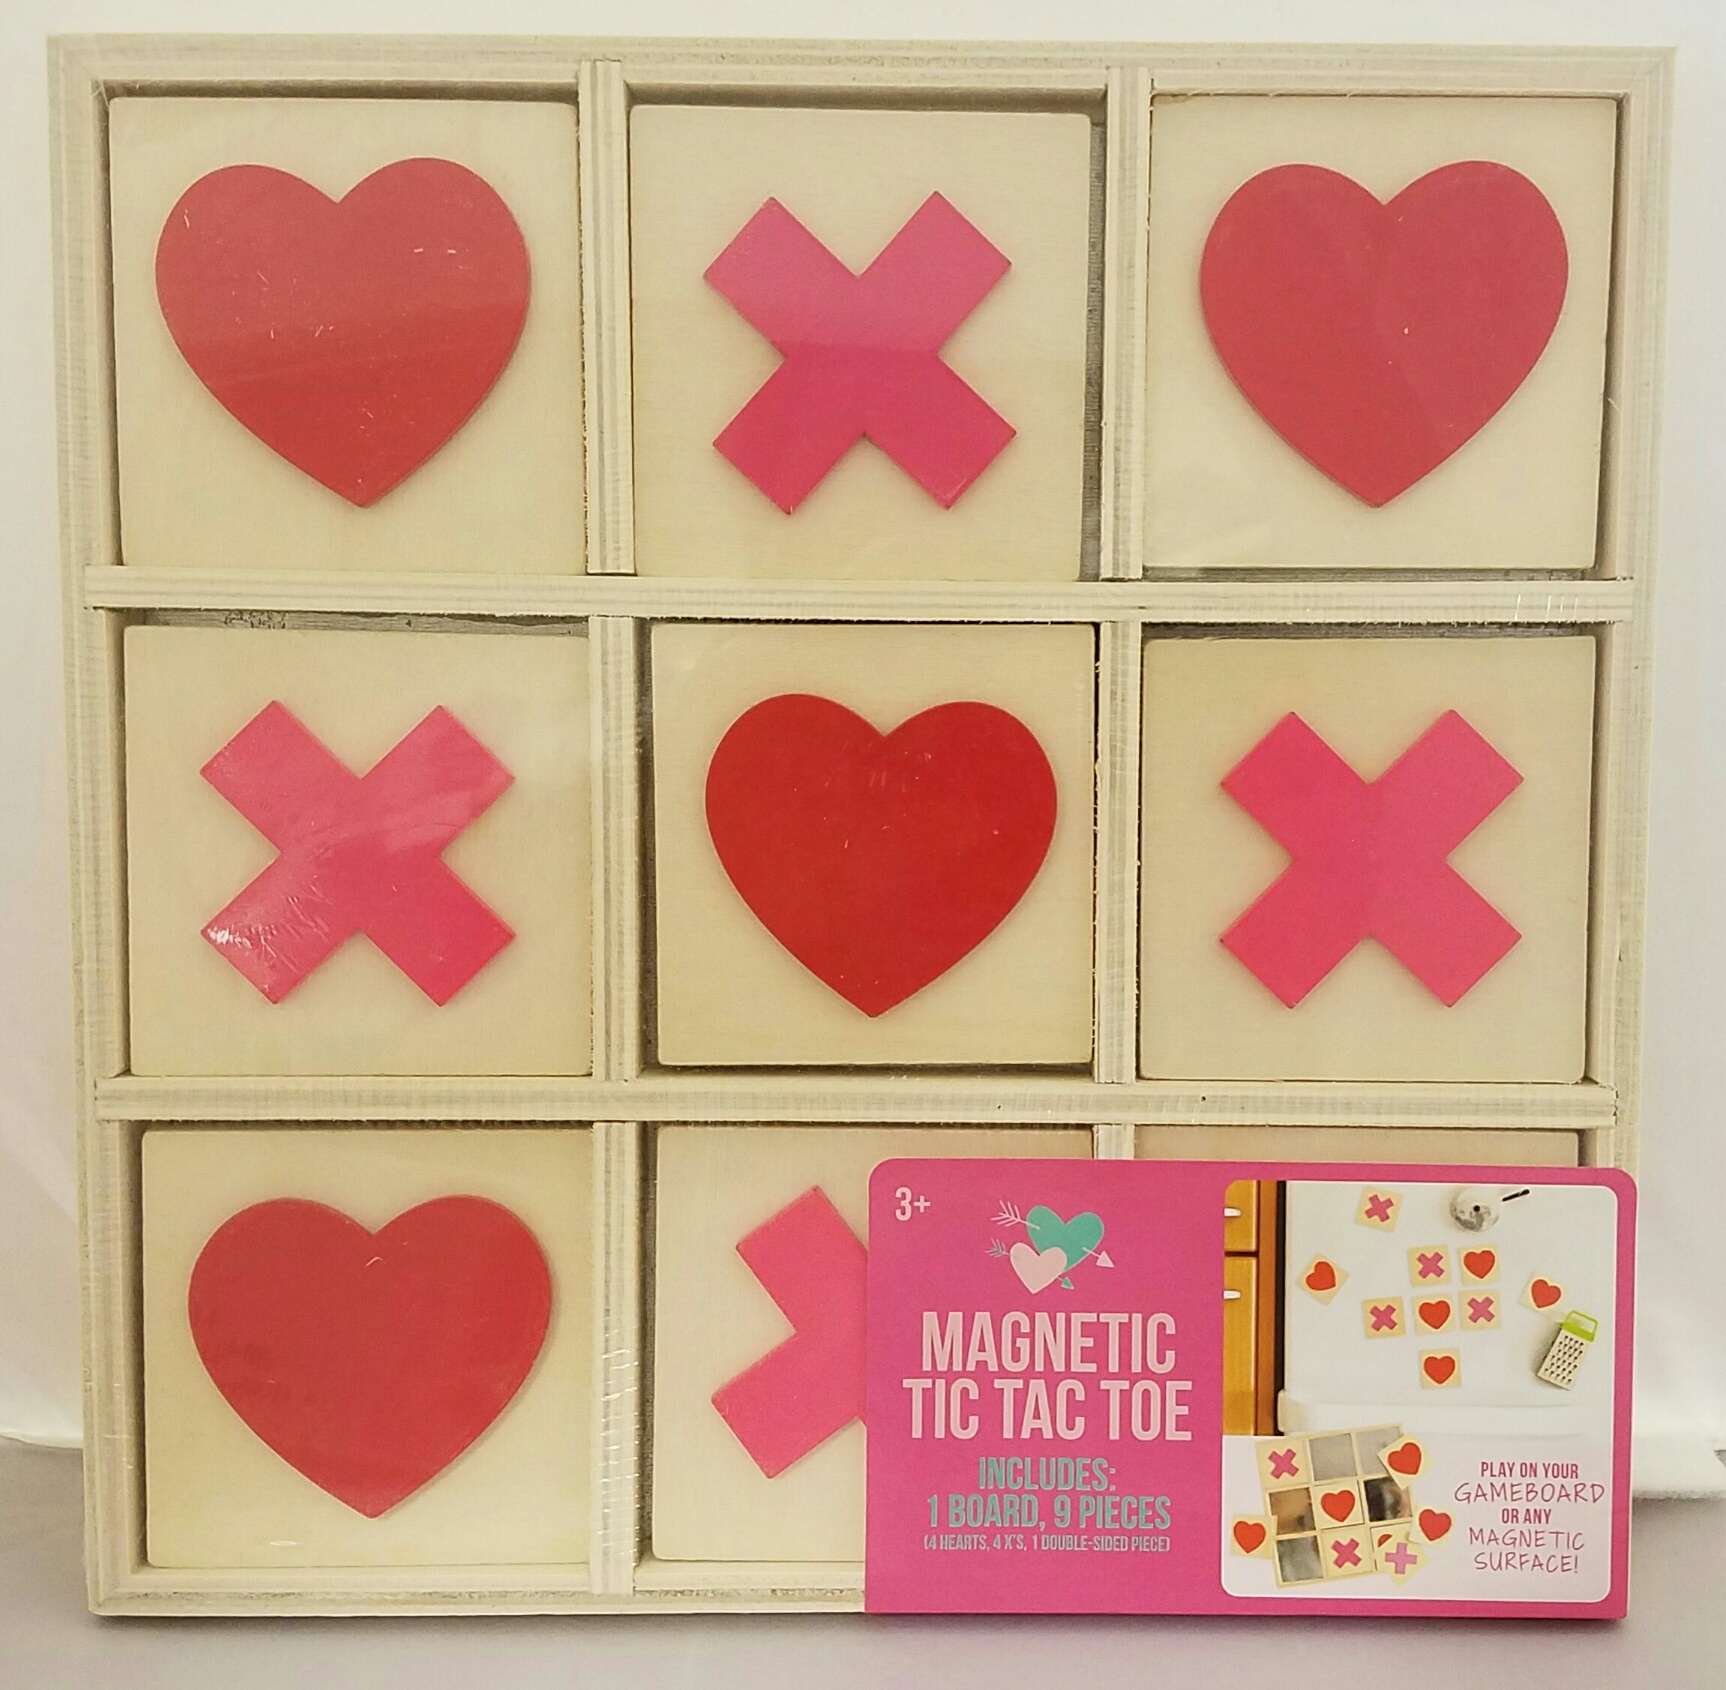 Target Recalls Magnetic Tic Tac Toe Games Due to Choking and Magnet ...